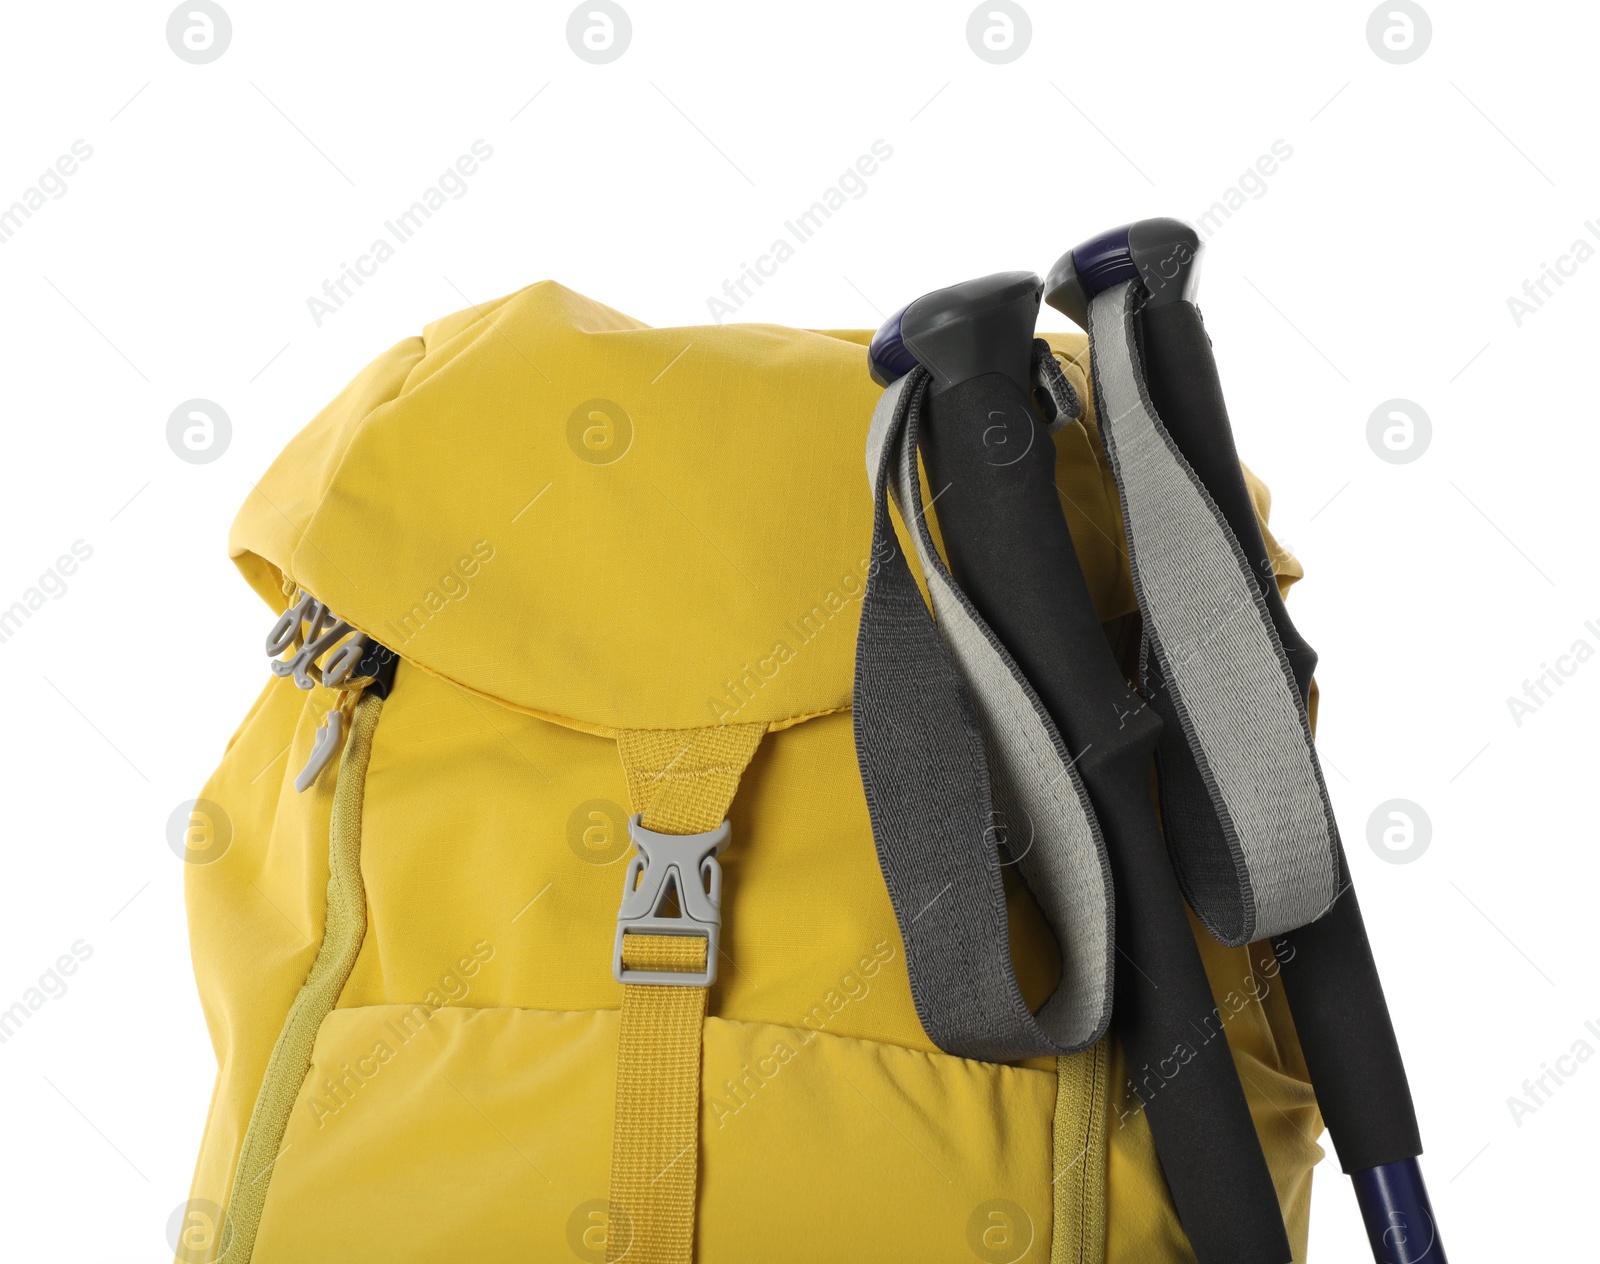 Photo of Trekking poles and yellow backpack on white background